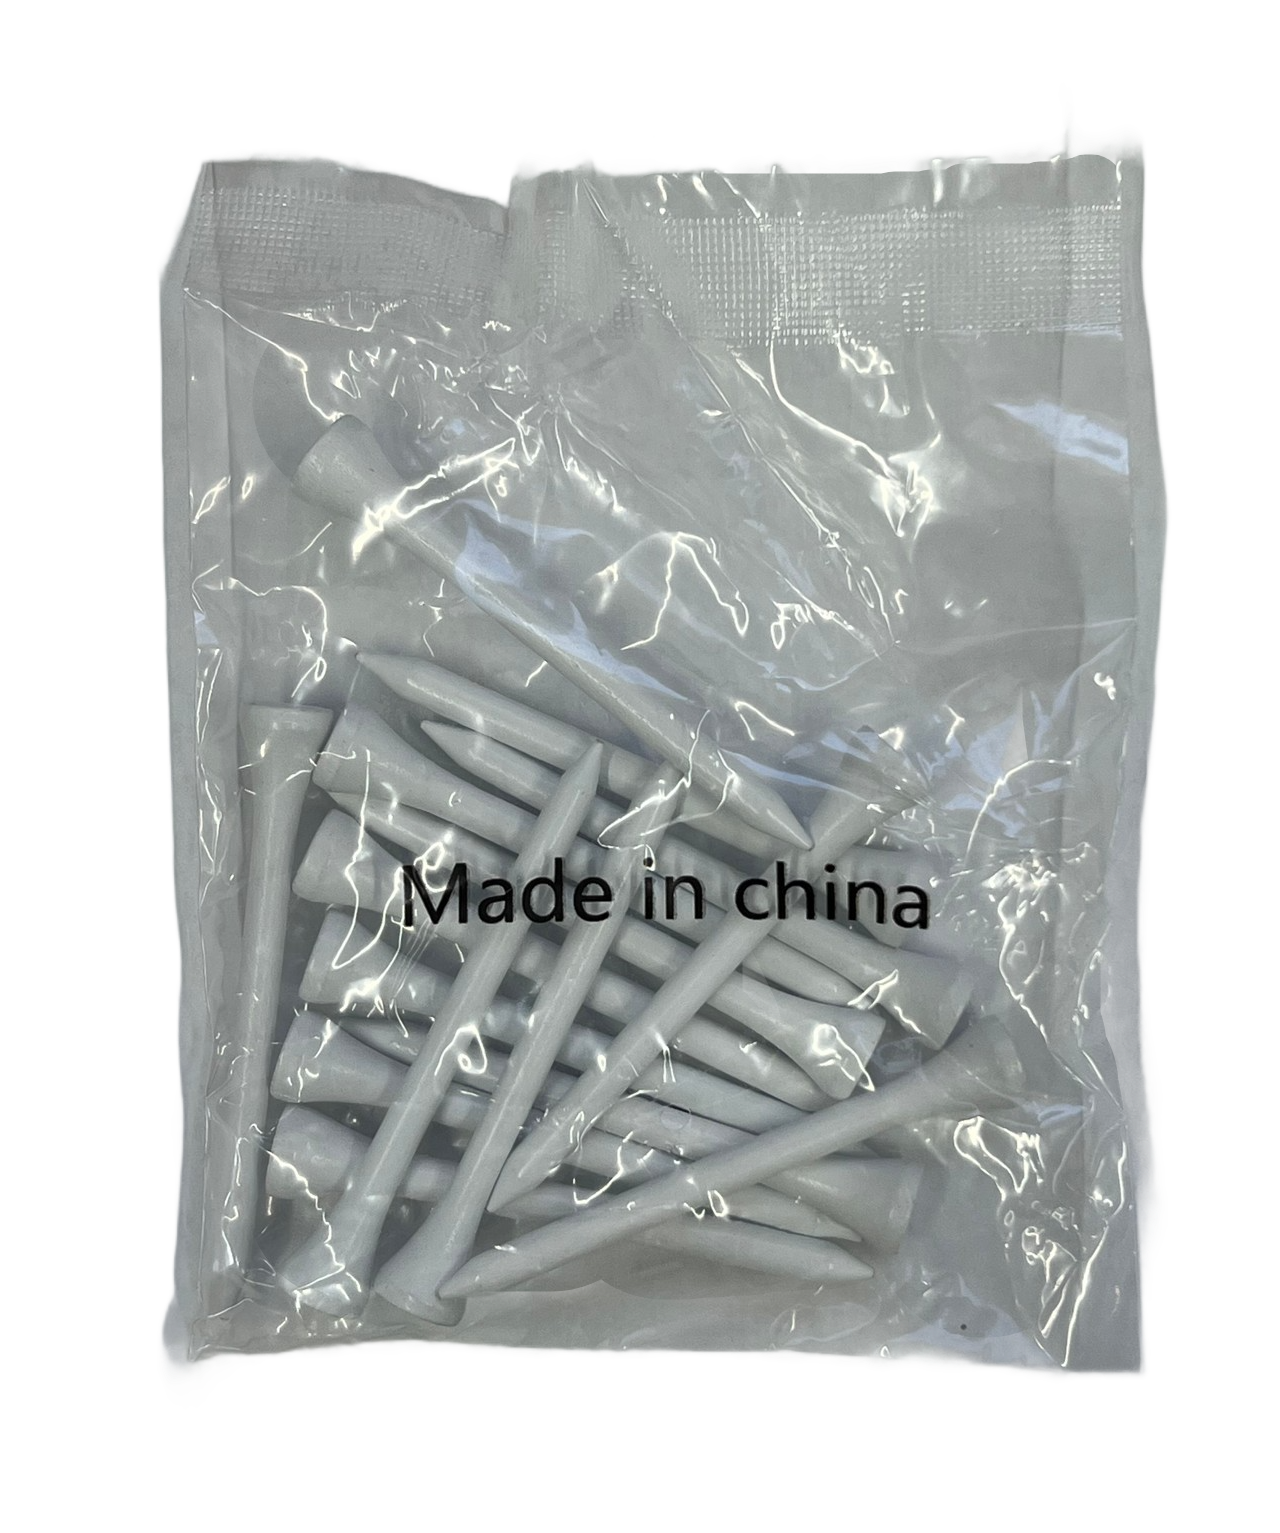 2 3/4" - 15ct wooden tee bags - Say "Made in China" - Clearance